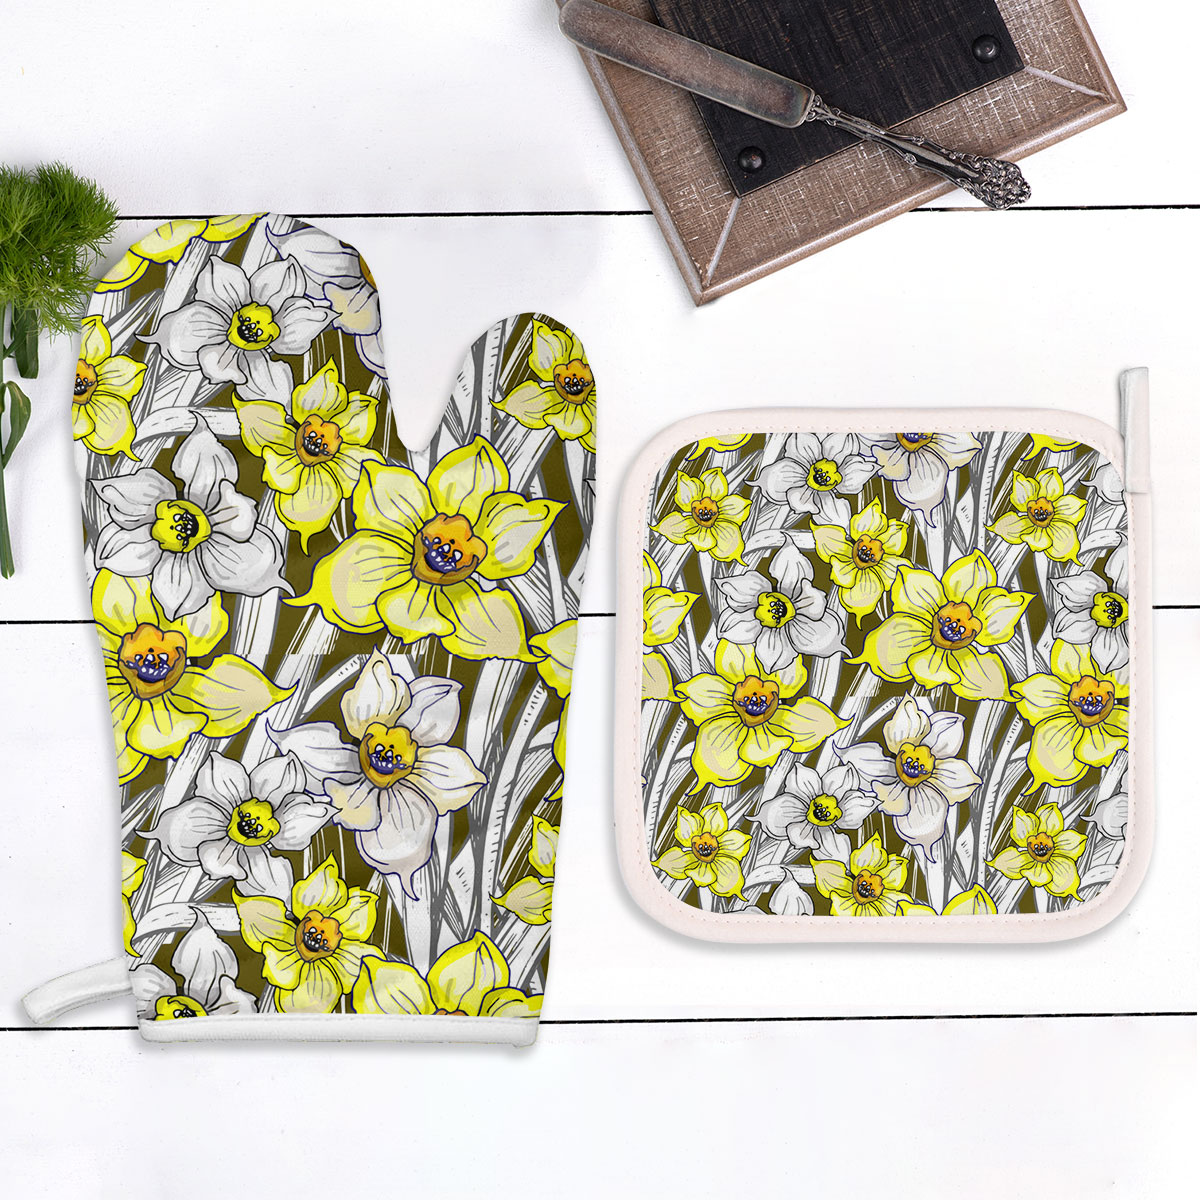 Botanical With Flowers Of Narcissus Daffodil Oven Mitts Pot Holder Set